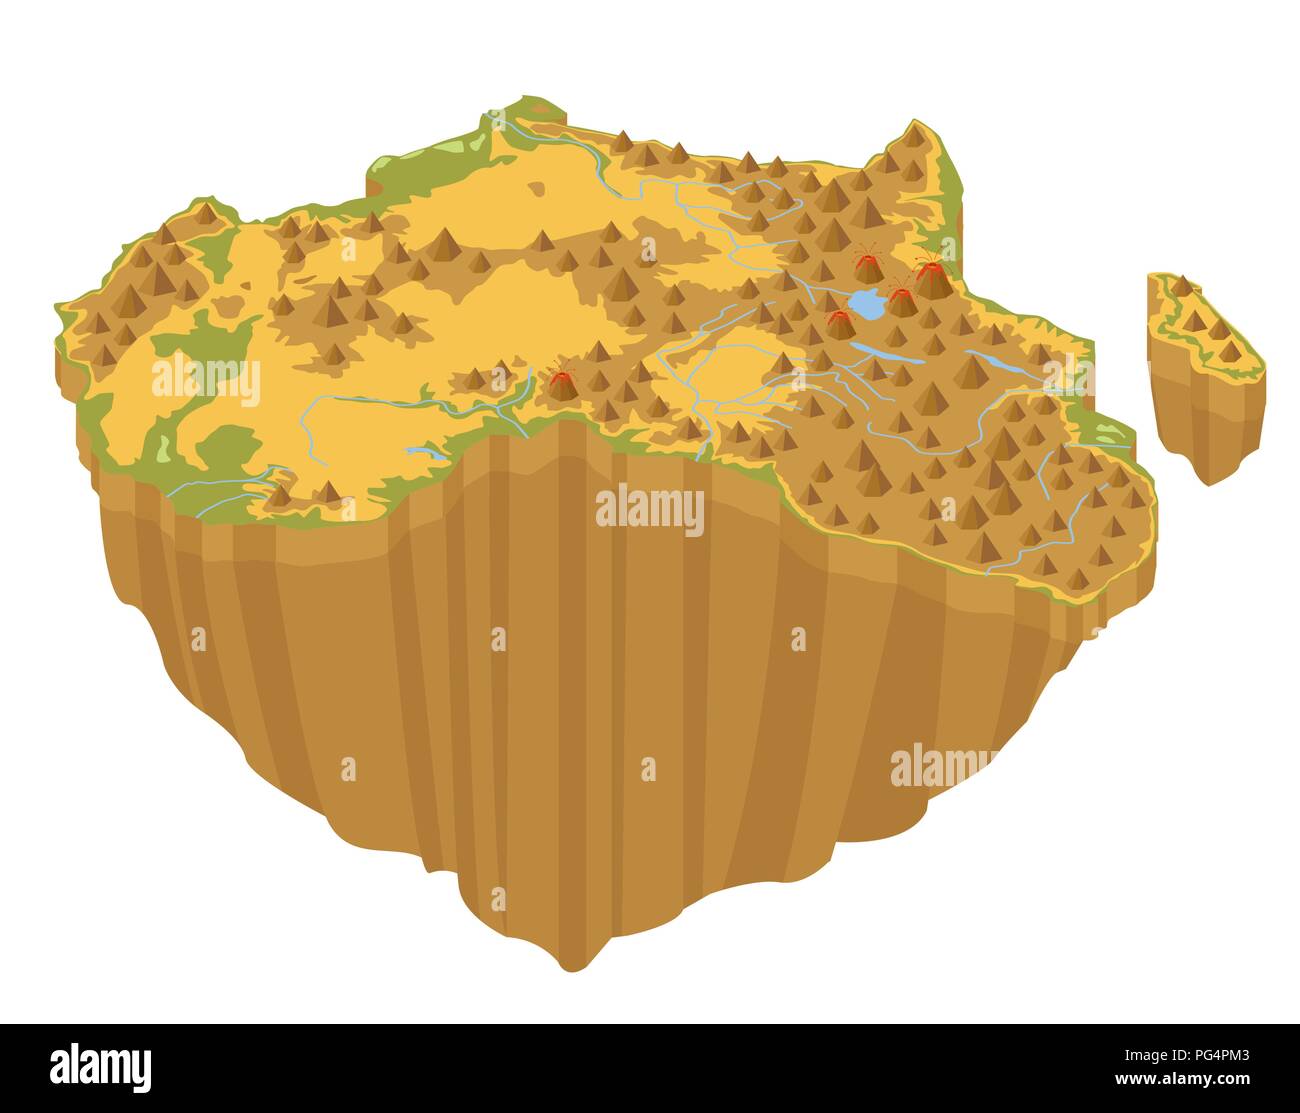 Flat 3d Isometric Africa Map Constructor Elements Isolated On White Build Your Own Geography 7500